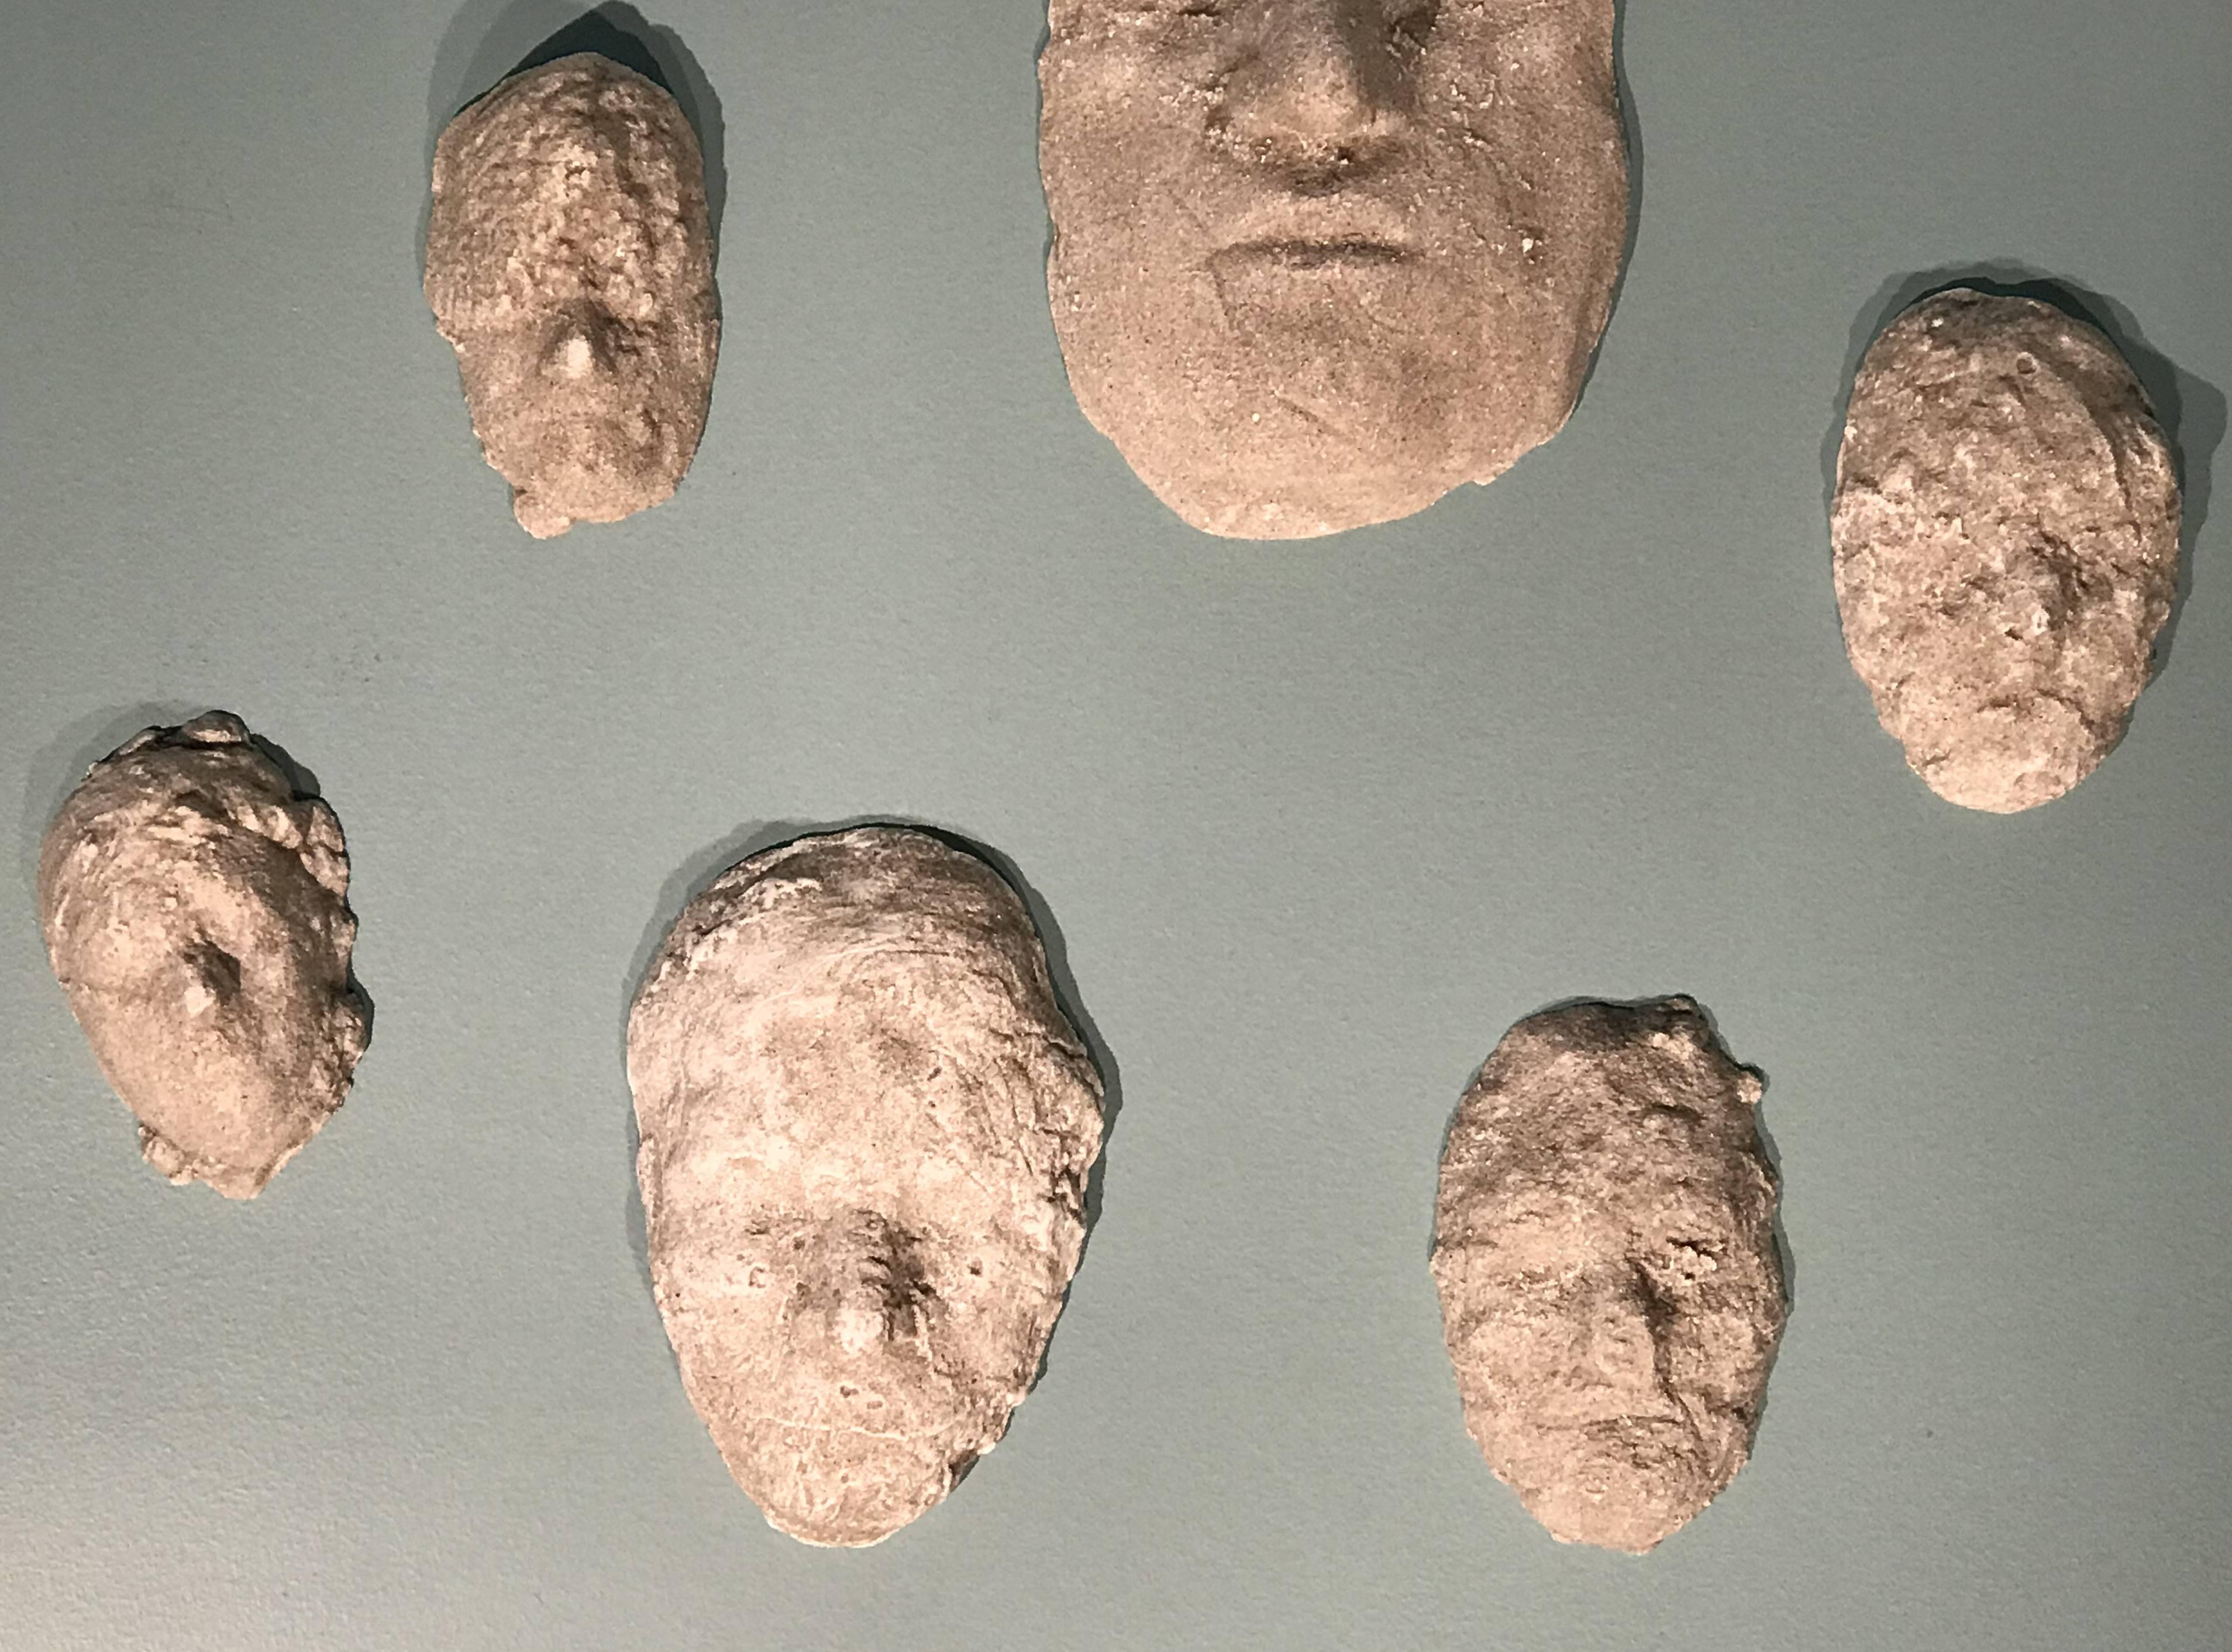 Molded Neal Beckerman Set of 12 Abstract Plaster Relief Sculptures, Heads